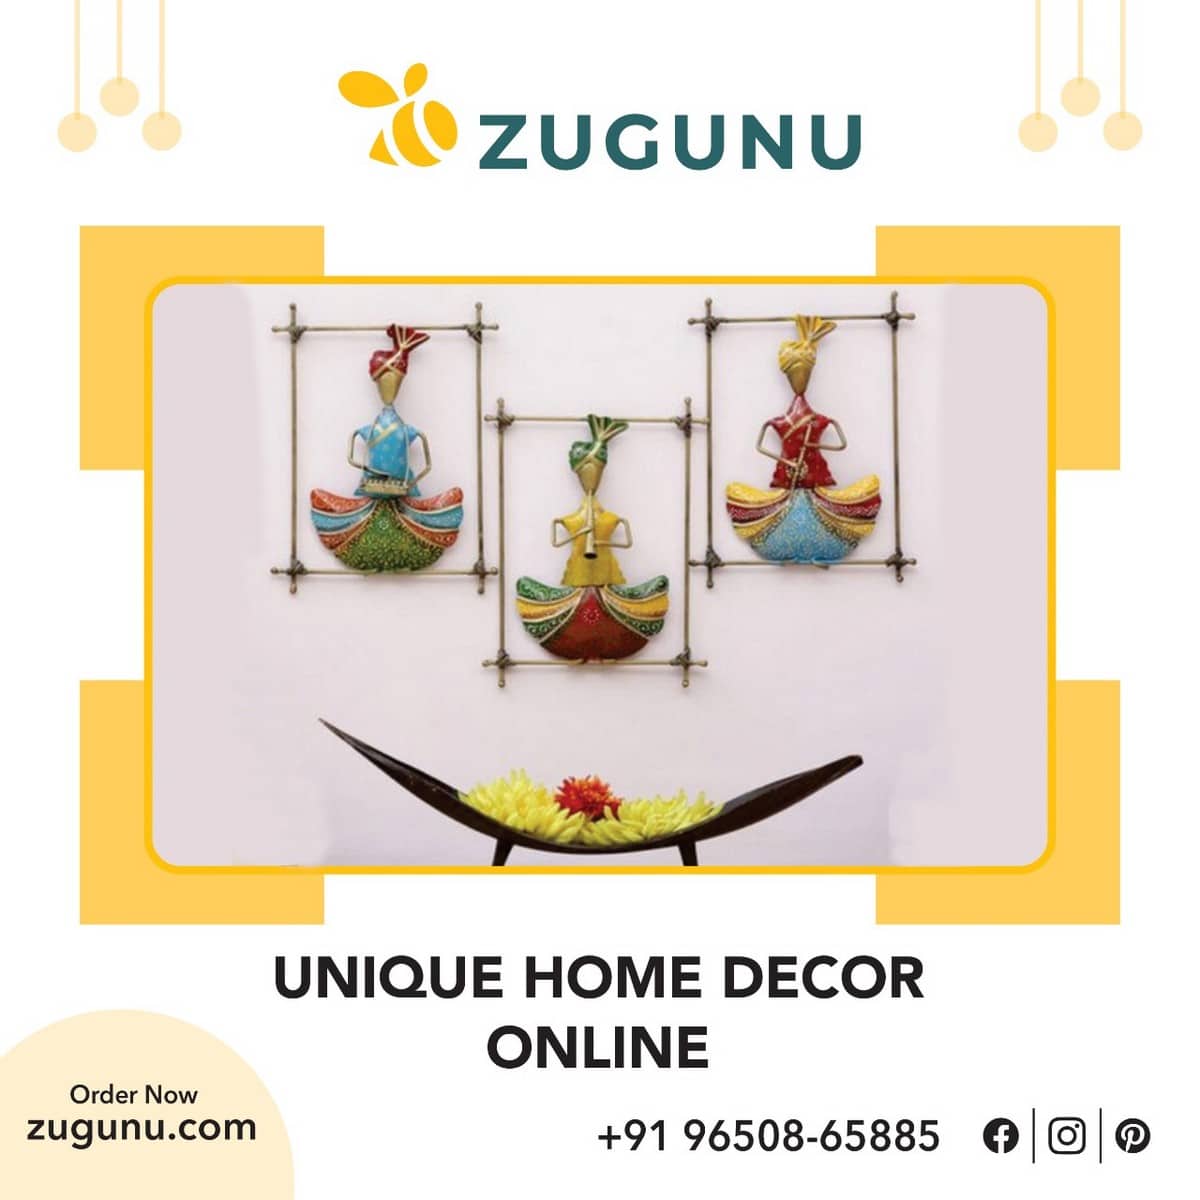 Buy Unique Home Decor Online for Personal Or Gifting